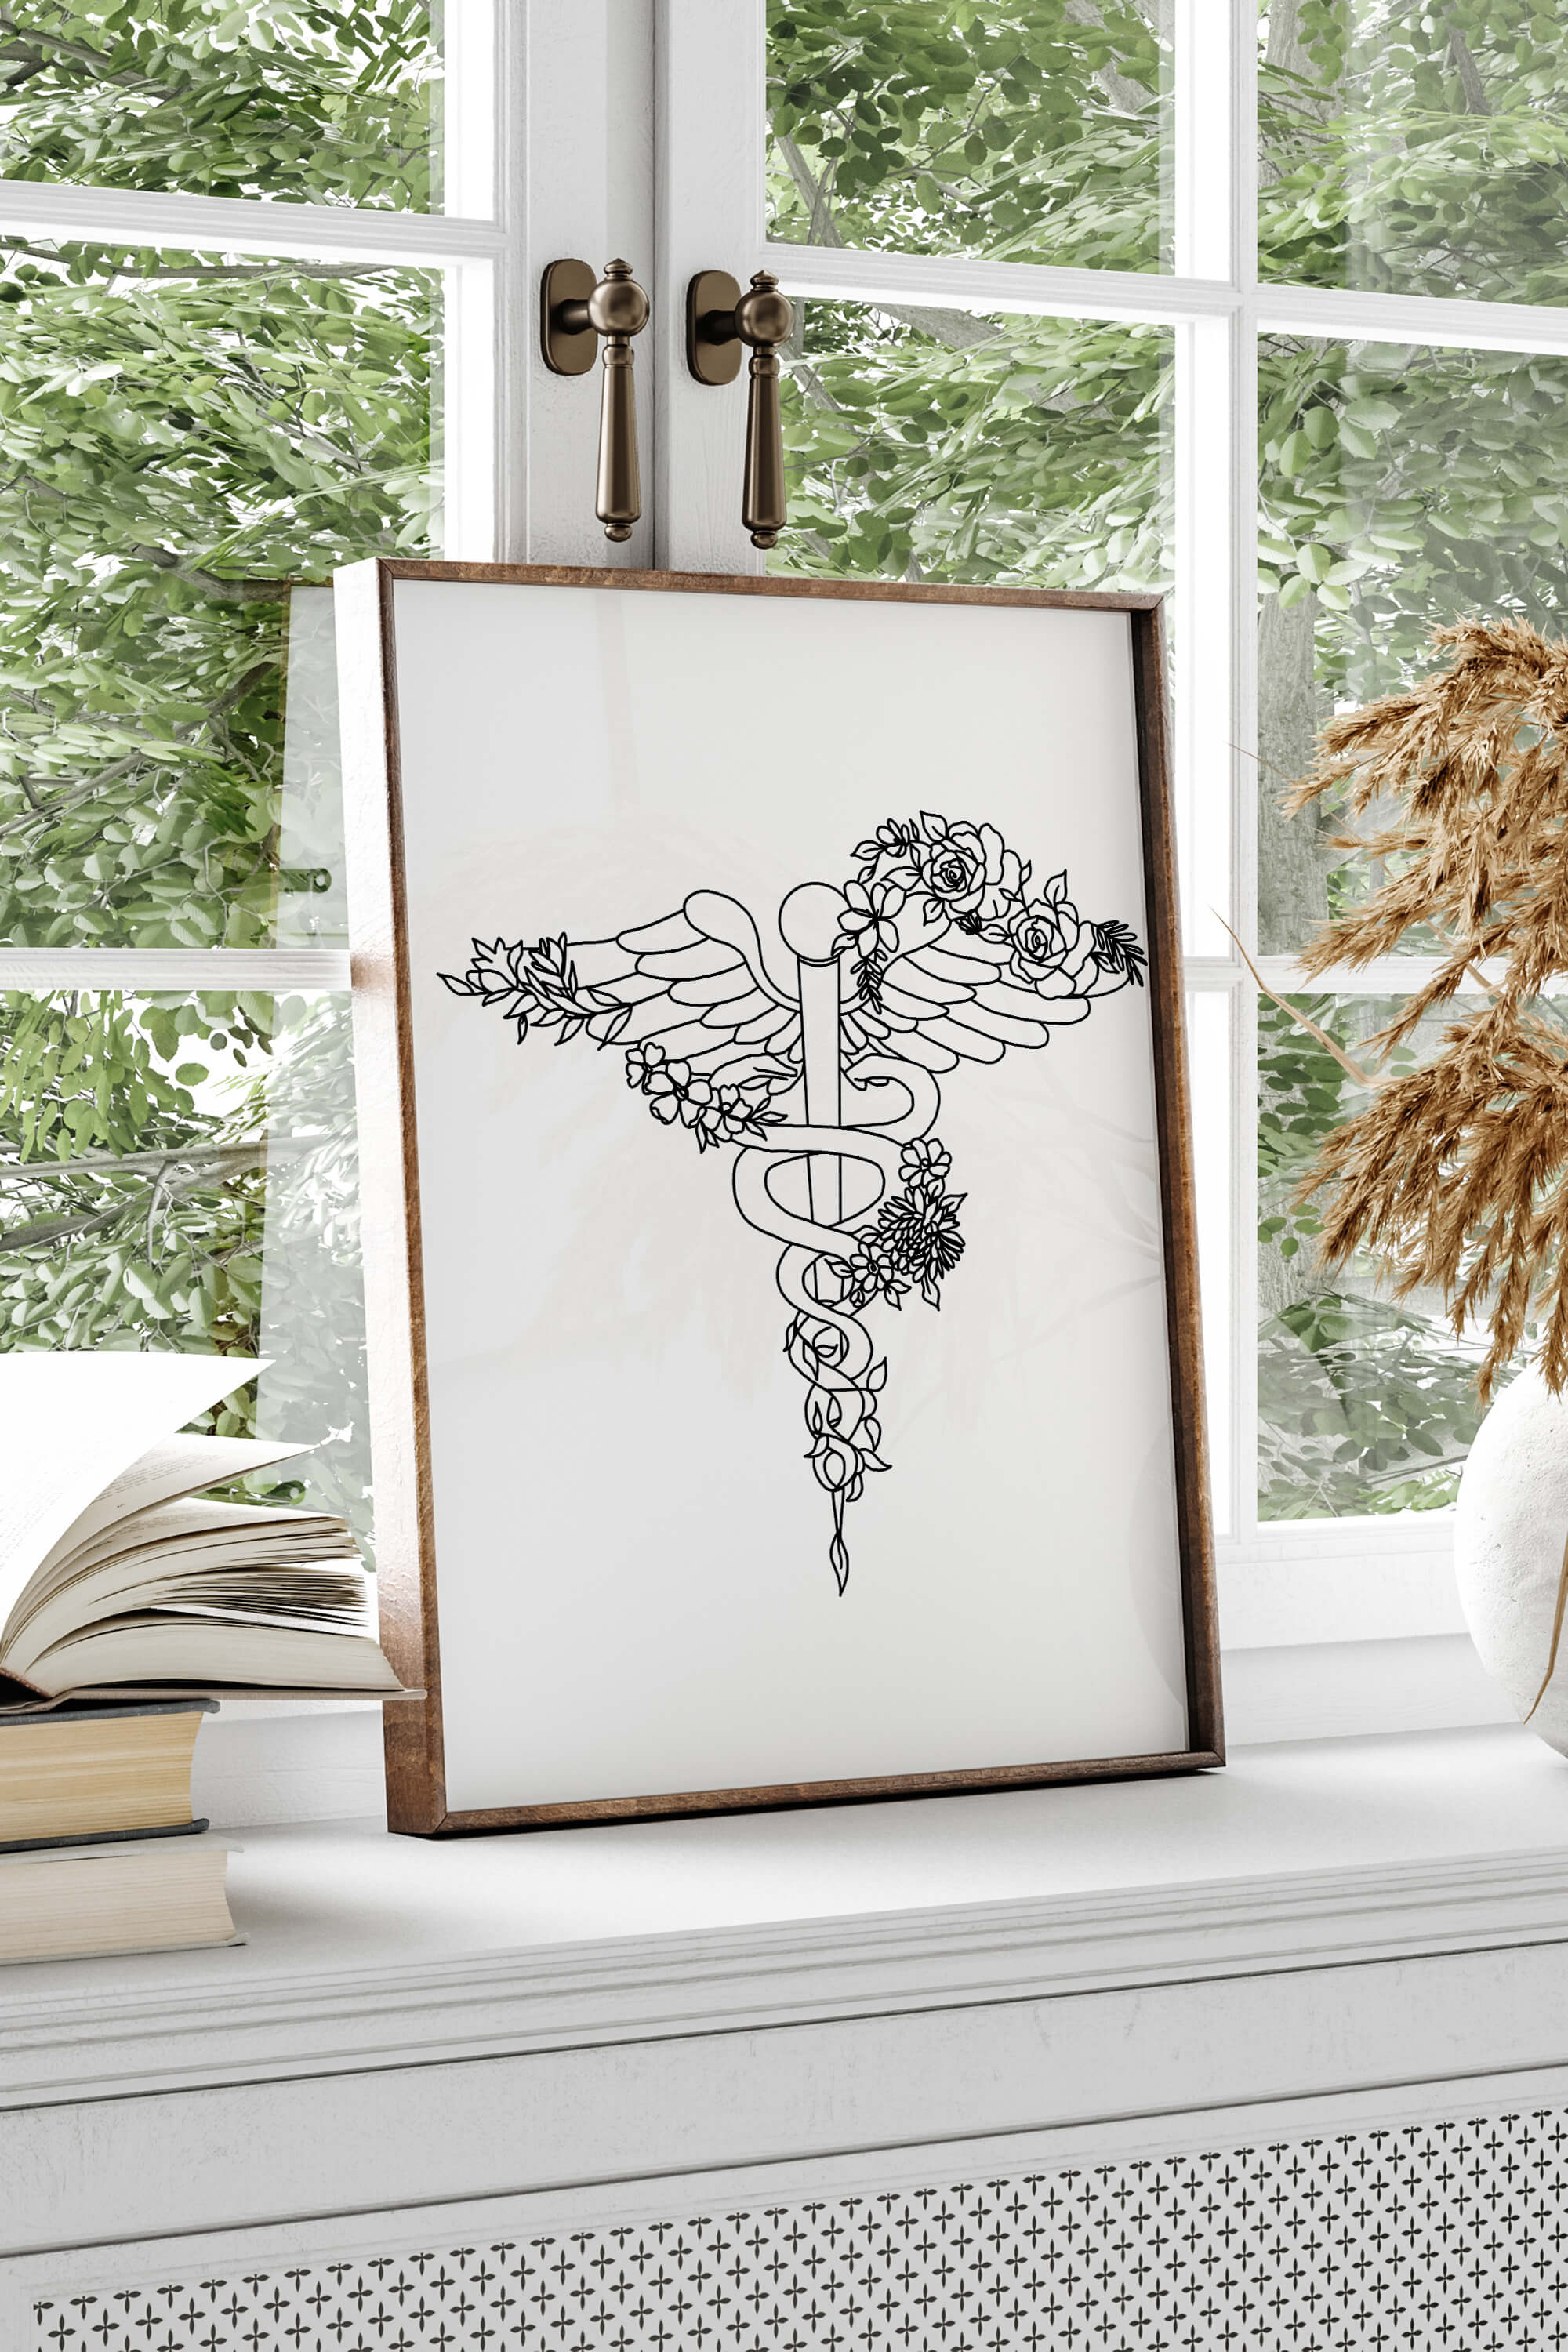 A black and white poster with intricate line art, seamlessly blending into modern therapist office decor. Simplicity reflecting clarity and focus in the medical profession.